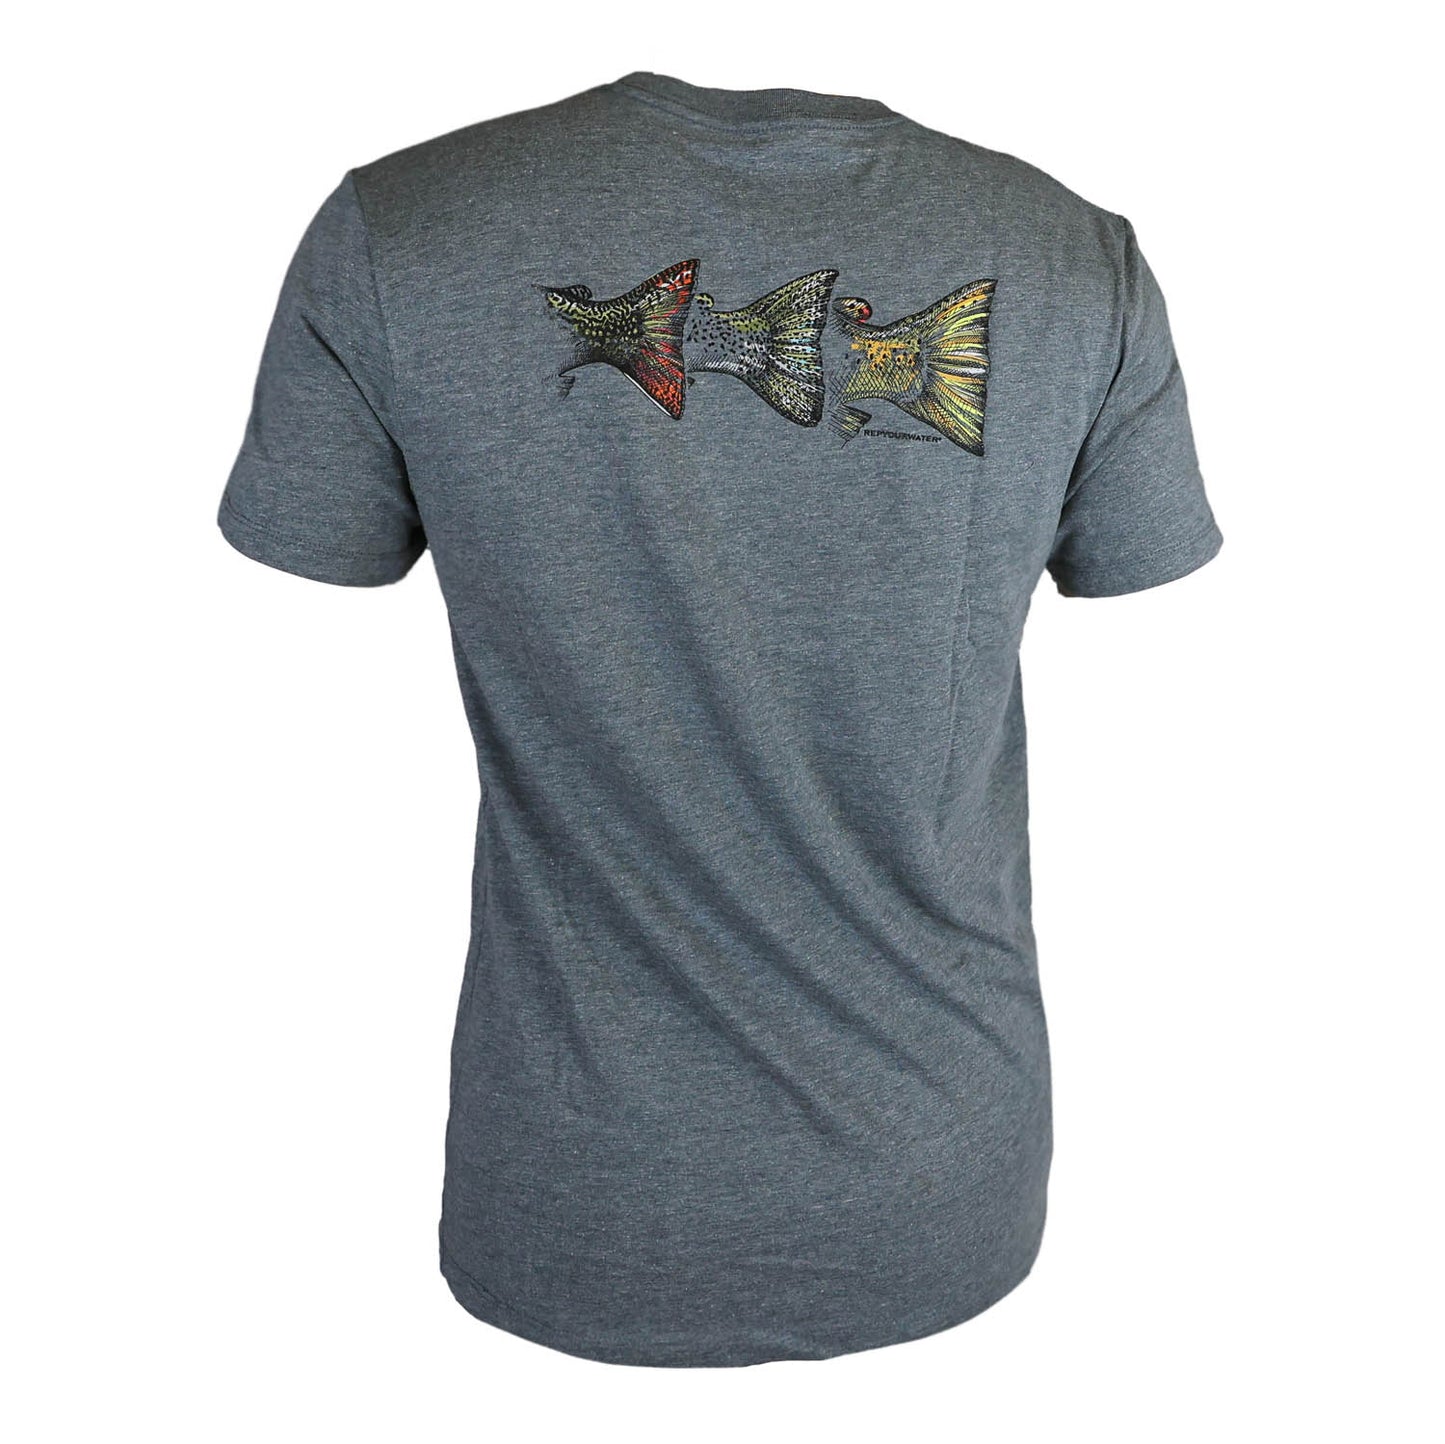 A gray shirt featuring 3 trout tails on the back.